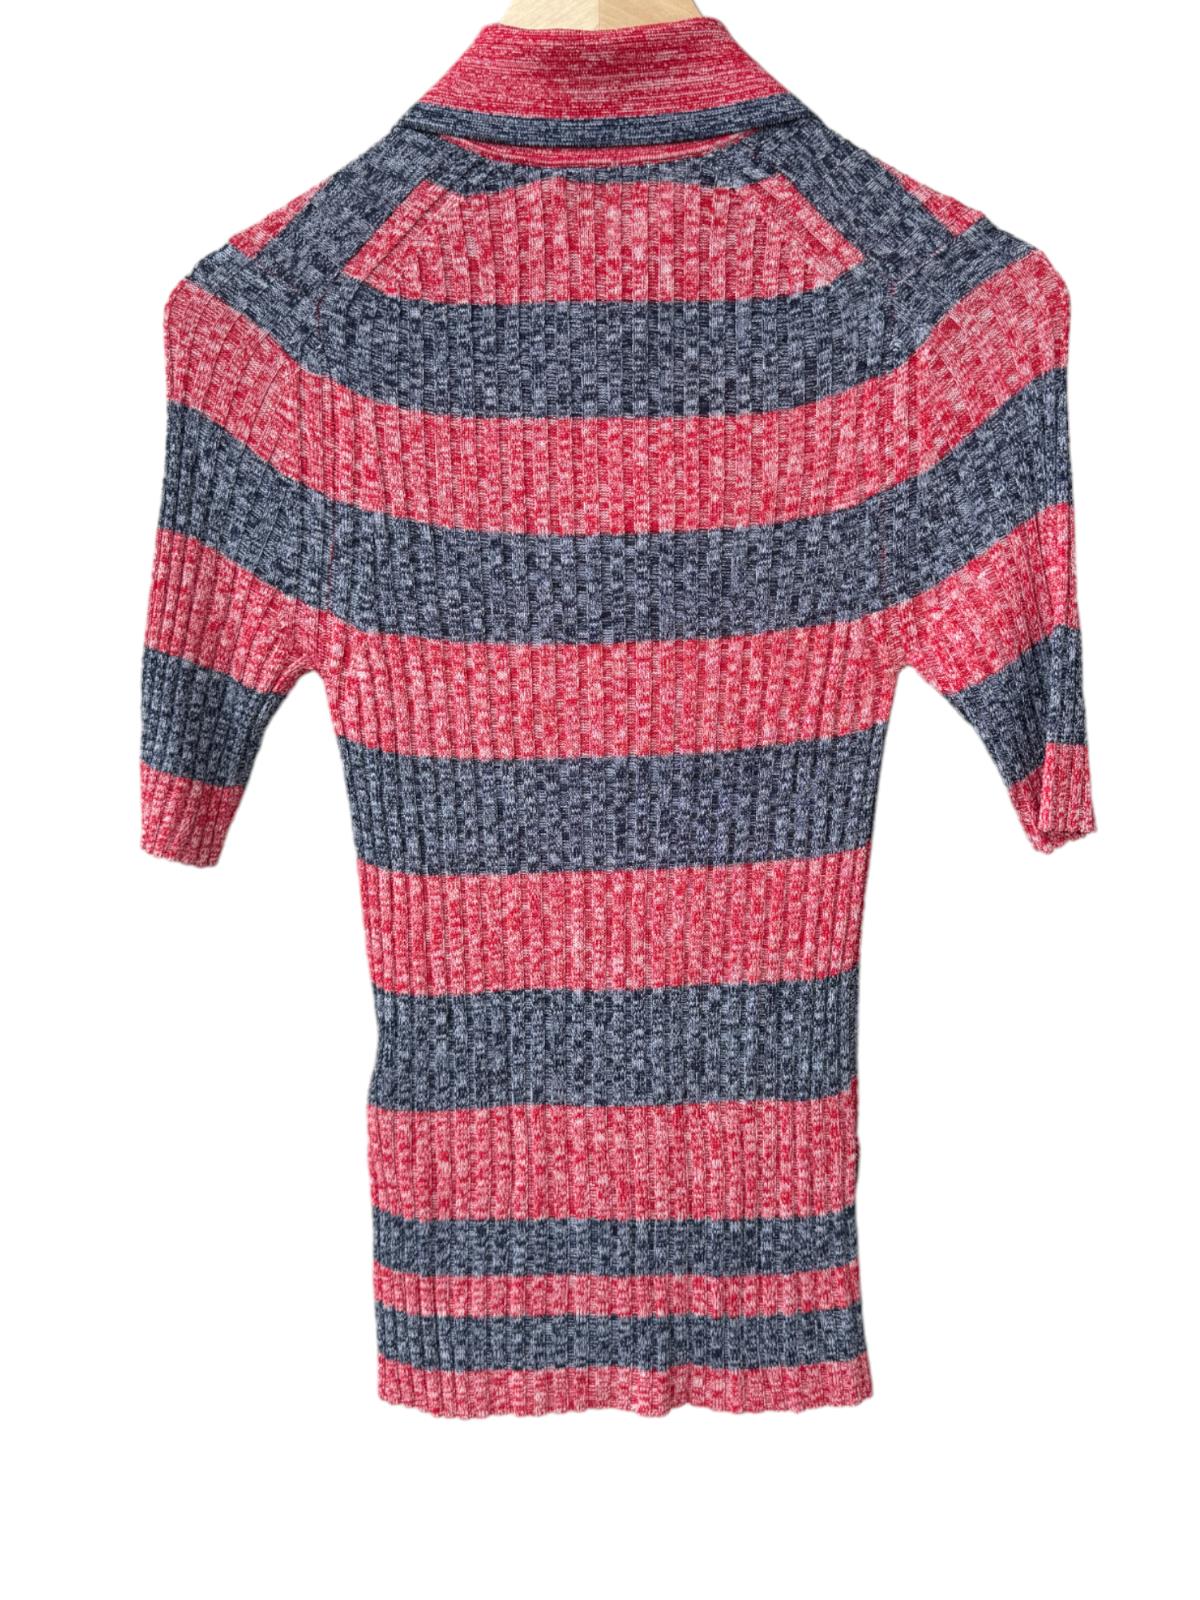 Zimmermann High Tide Rib Polo Shirt | Navy/Red Marle Striped, Stretch, Knitted